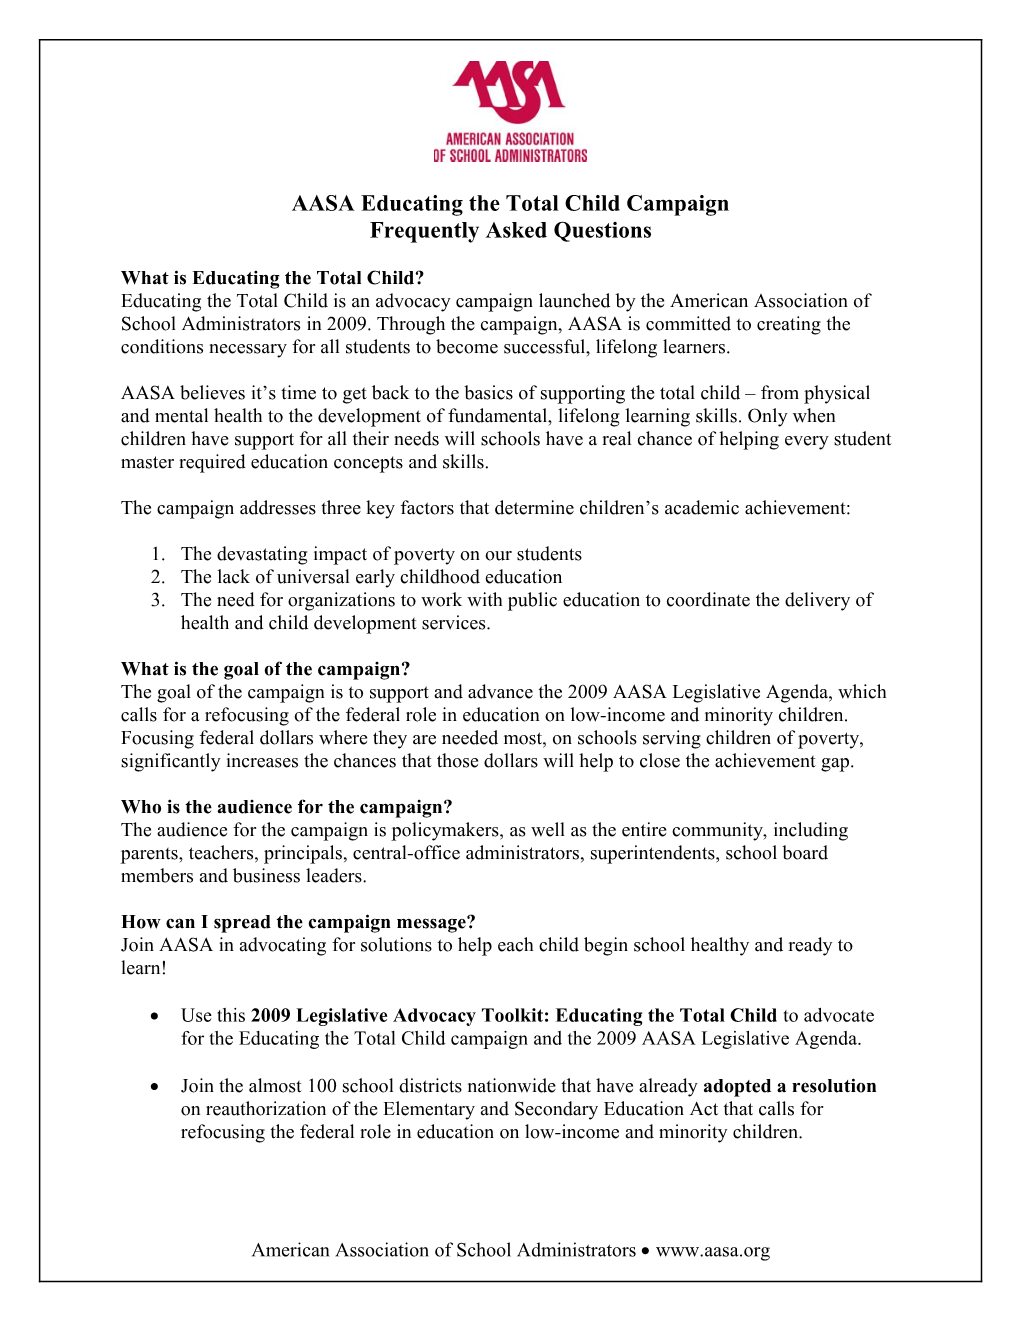 AASA Educating the Total Child Campaign